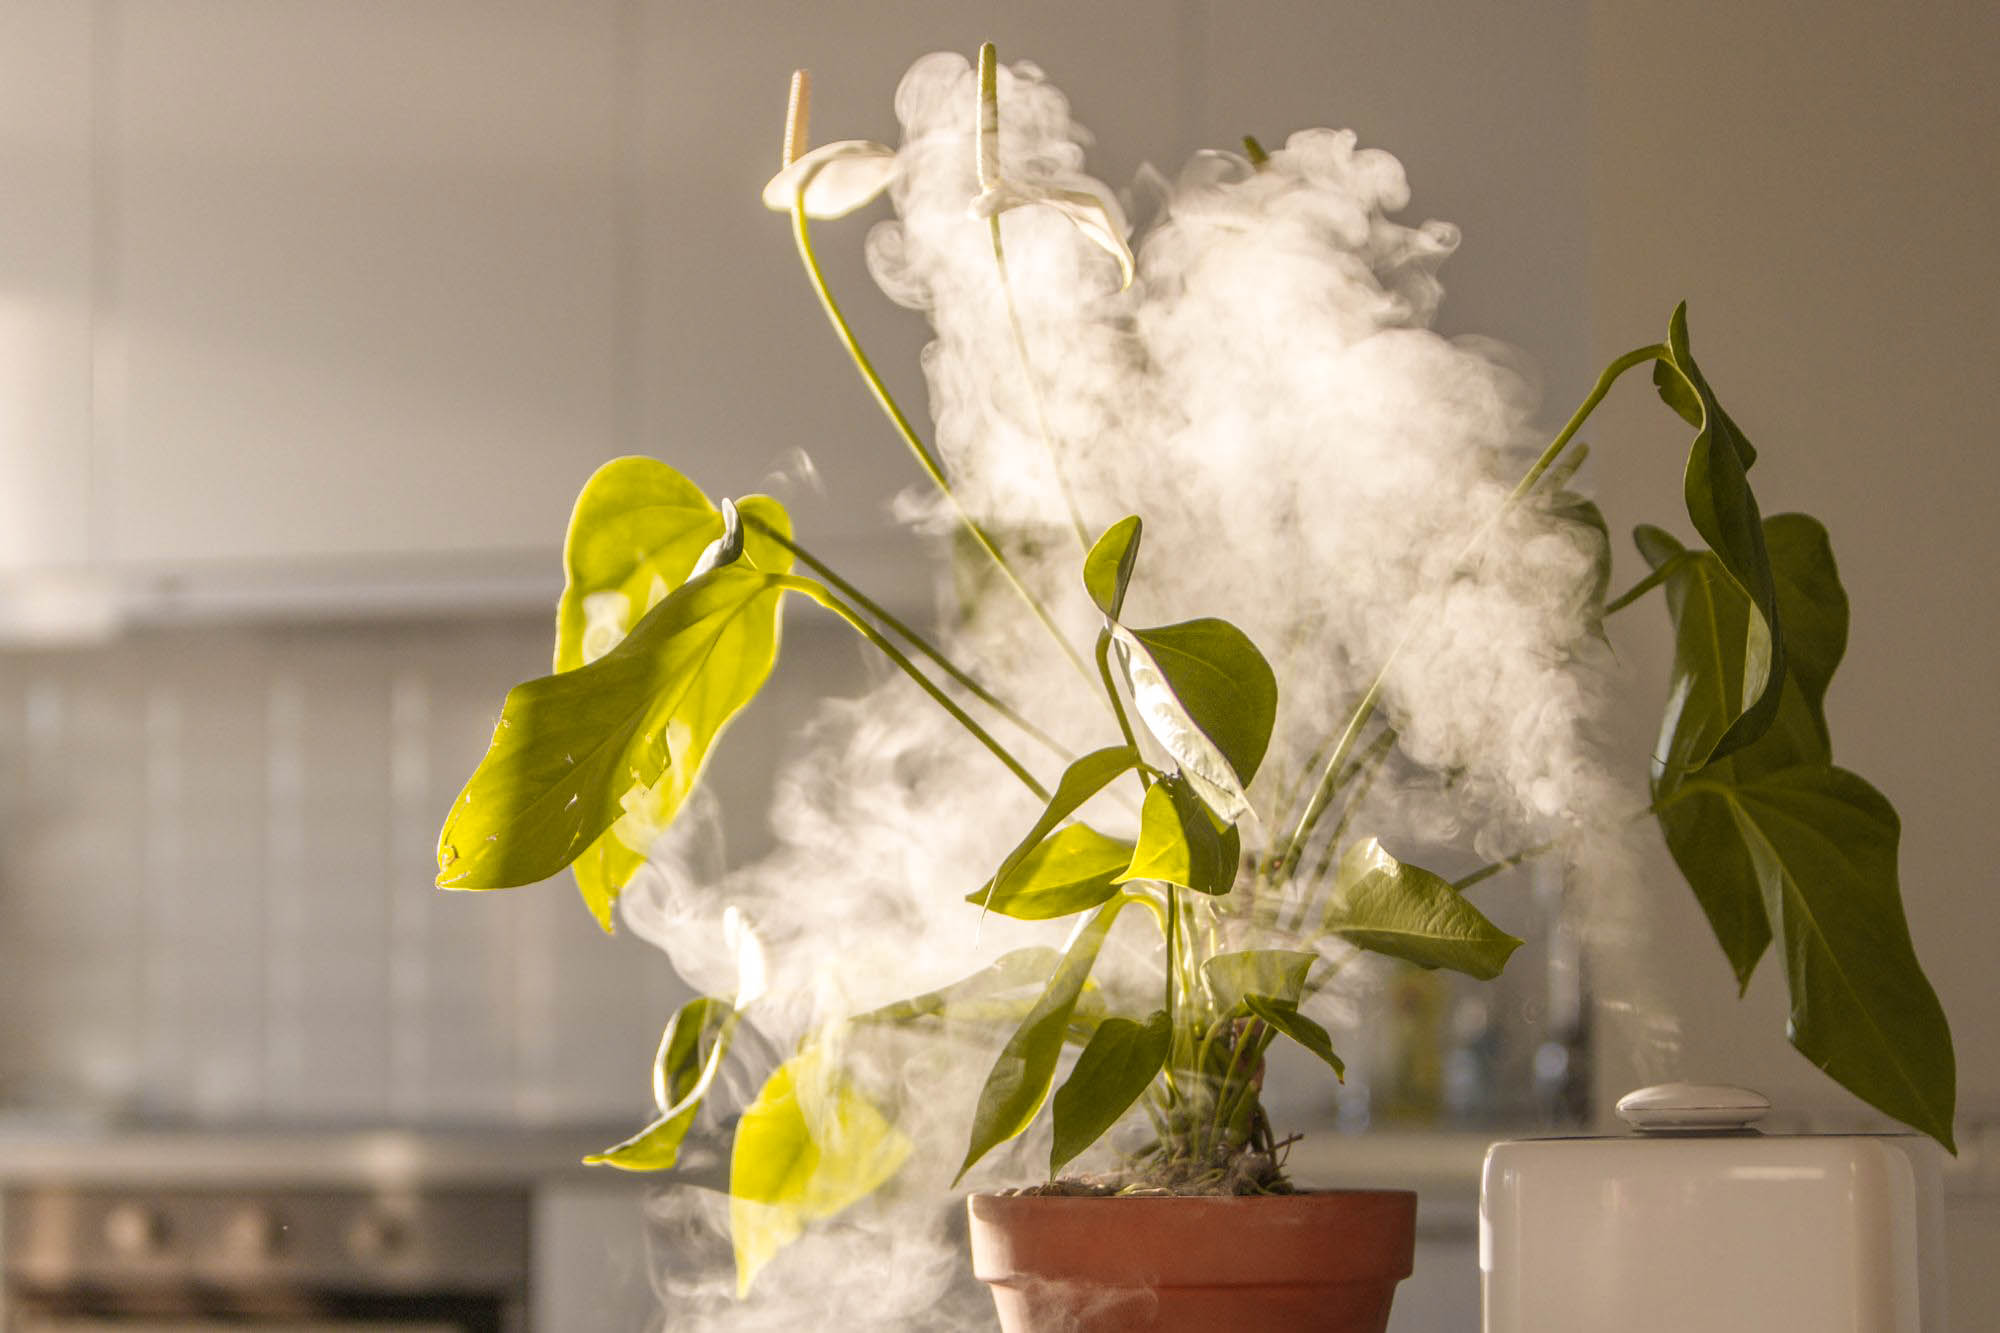 Monstera plant surrounded in a humidifier cloud.